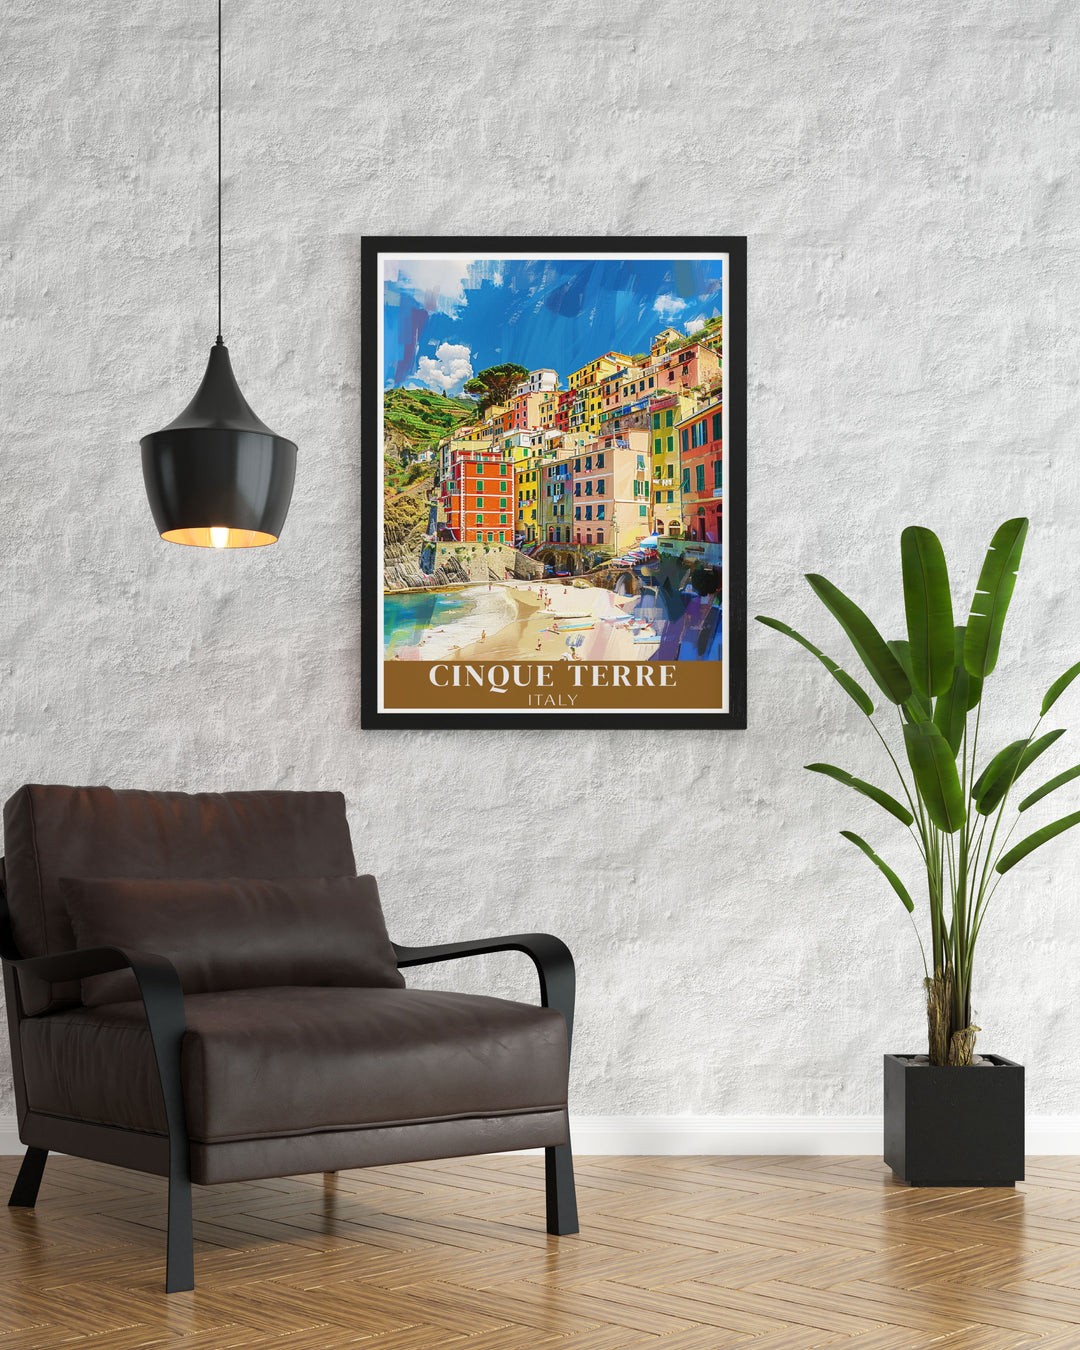 Cinque Terre art print of Monterosso al Mare an ideal gift for any occasion including anniversary gifts birthday gifts and Christmas gifts a thoughtful and timeless present that will be cherished by friends and loved ones.